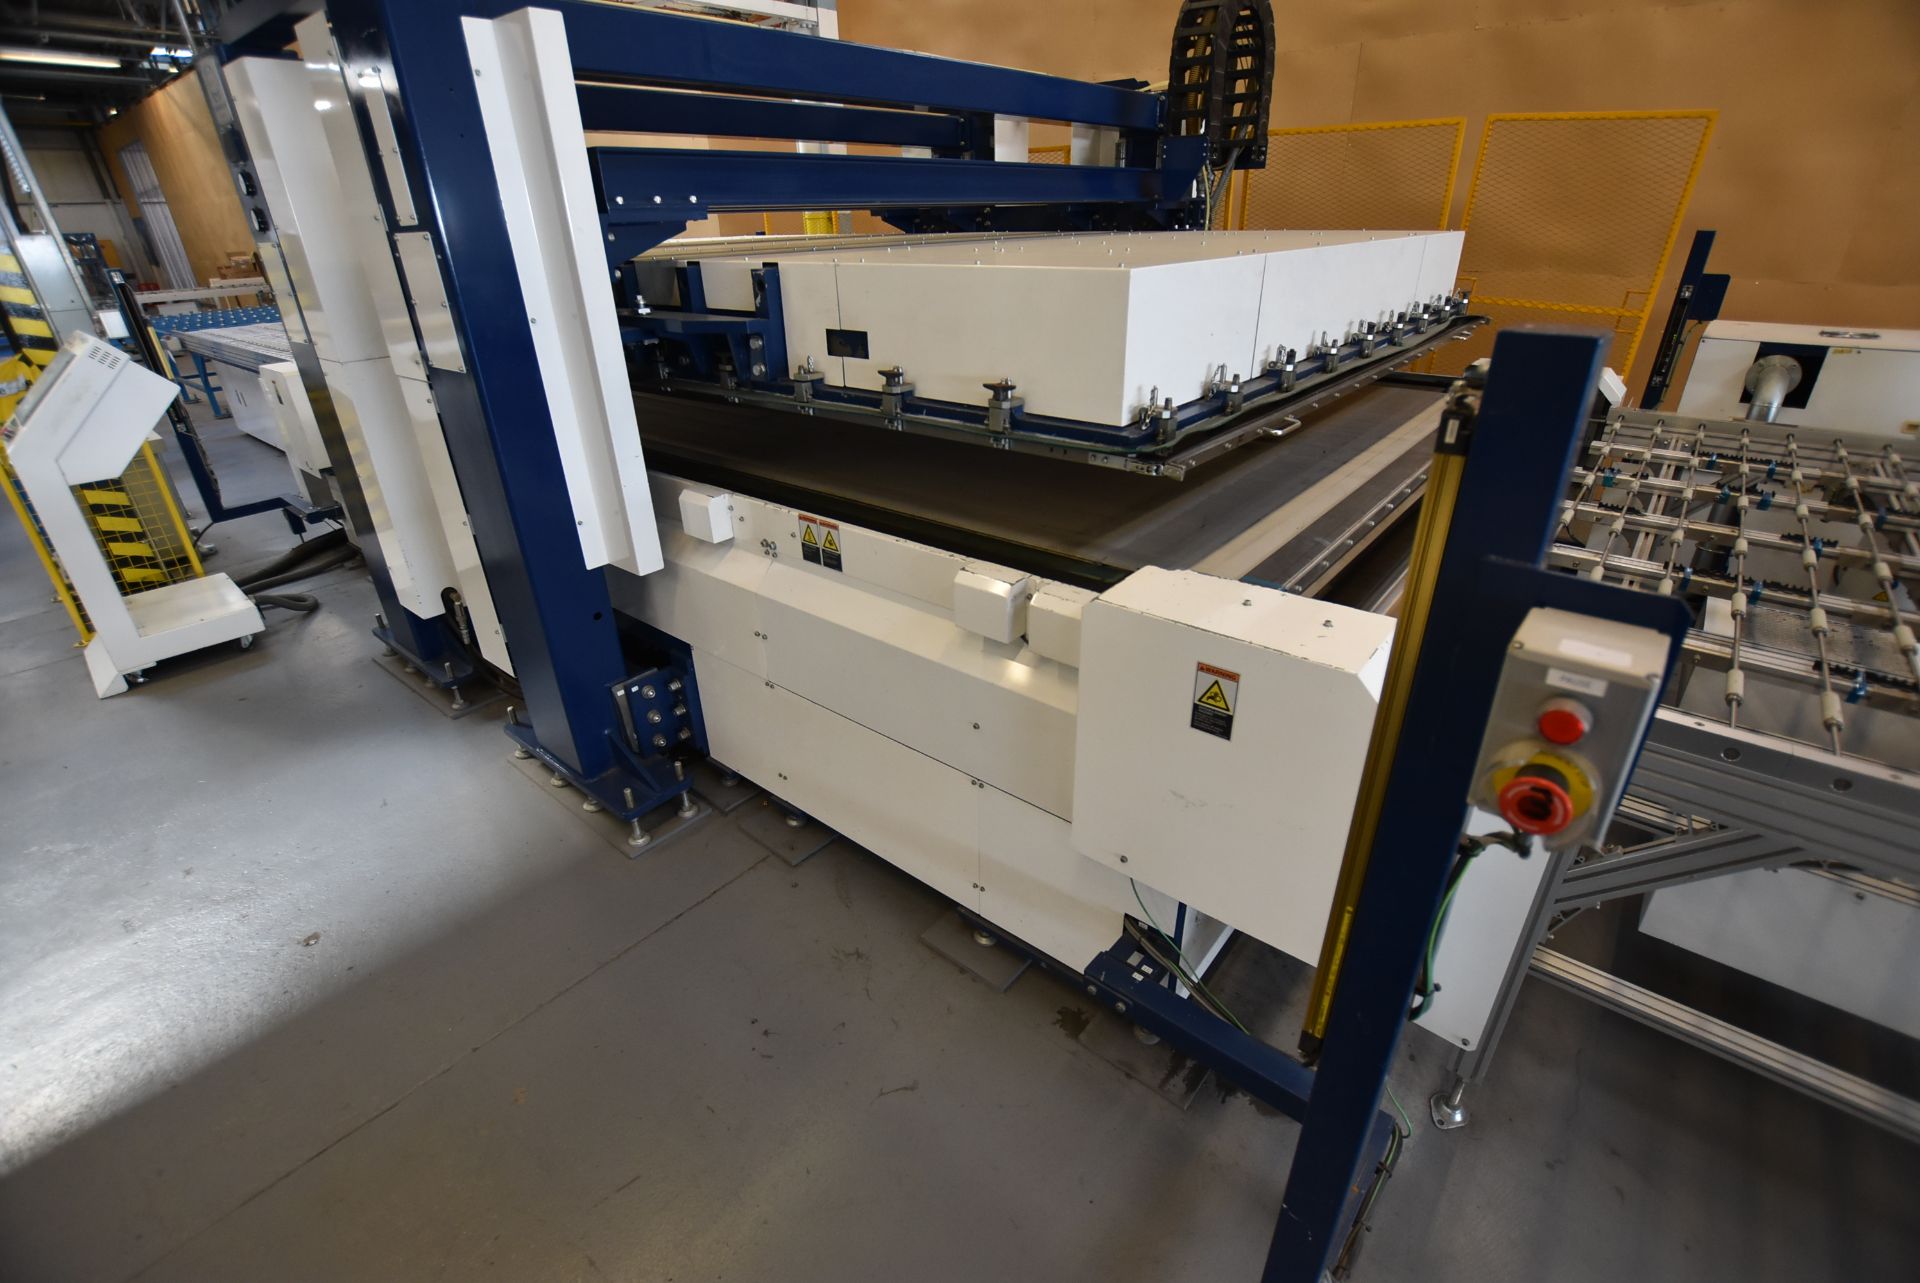 NPC LM-SA 220x400S PHOTOVOLTAIC MODULE LAMINATOR, serial no. 15002573-01, year of manufacture - Image 4 of 8